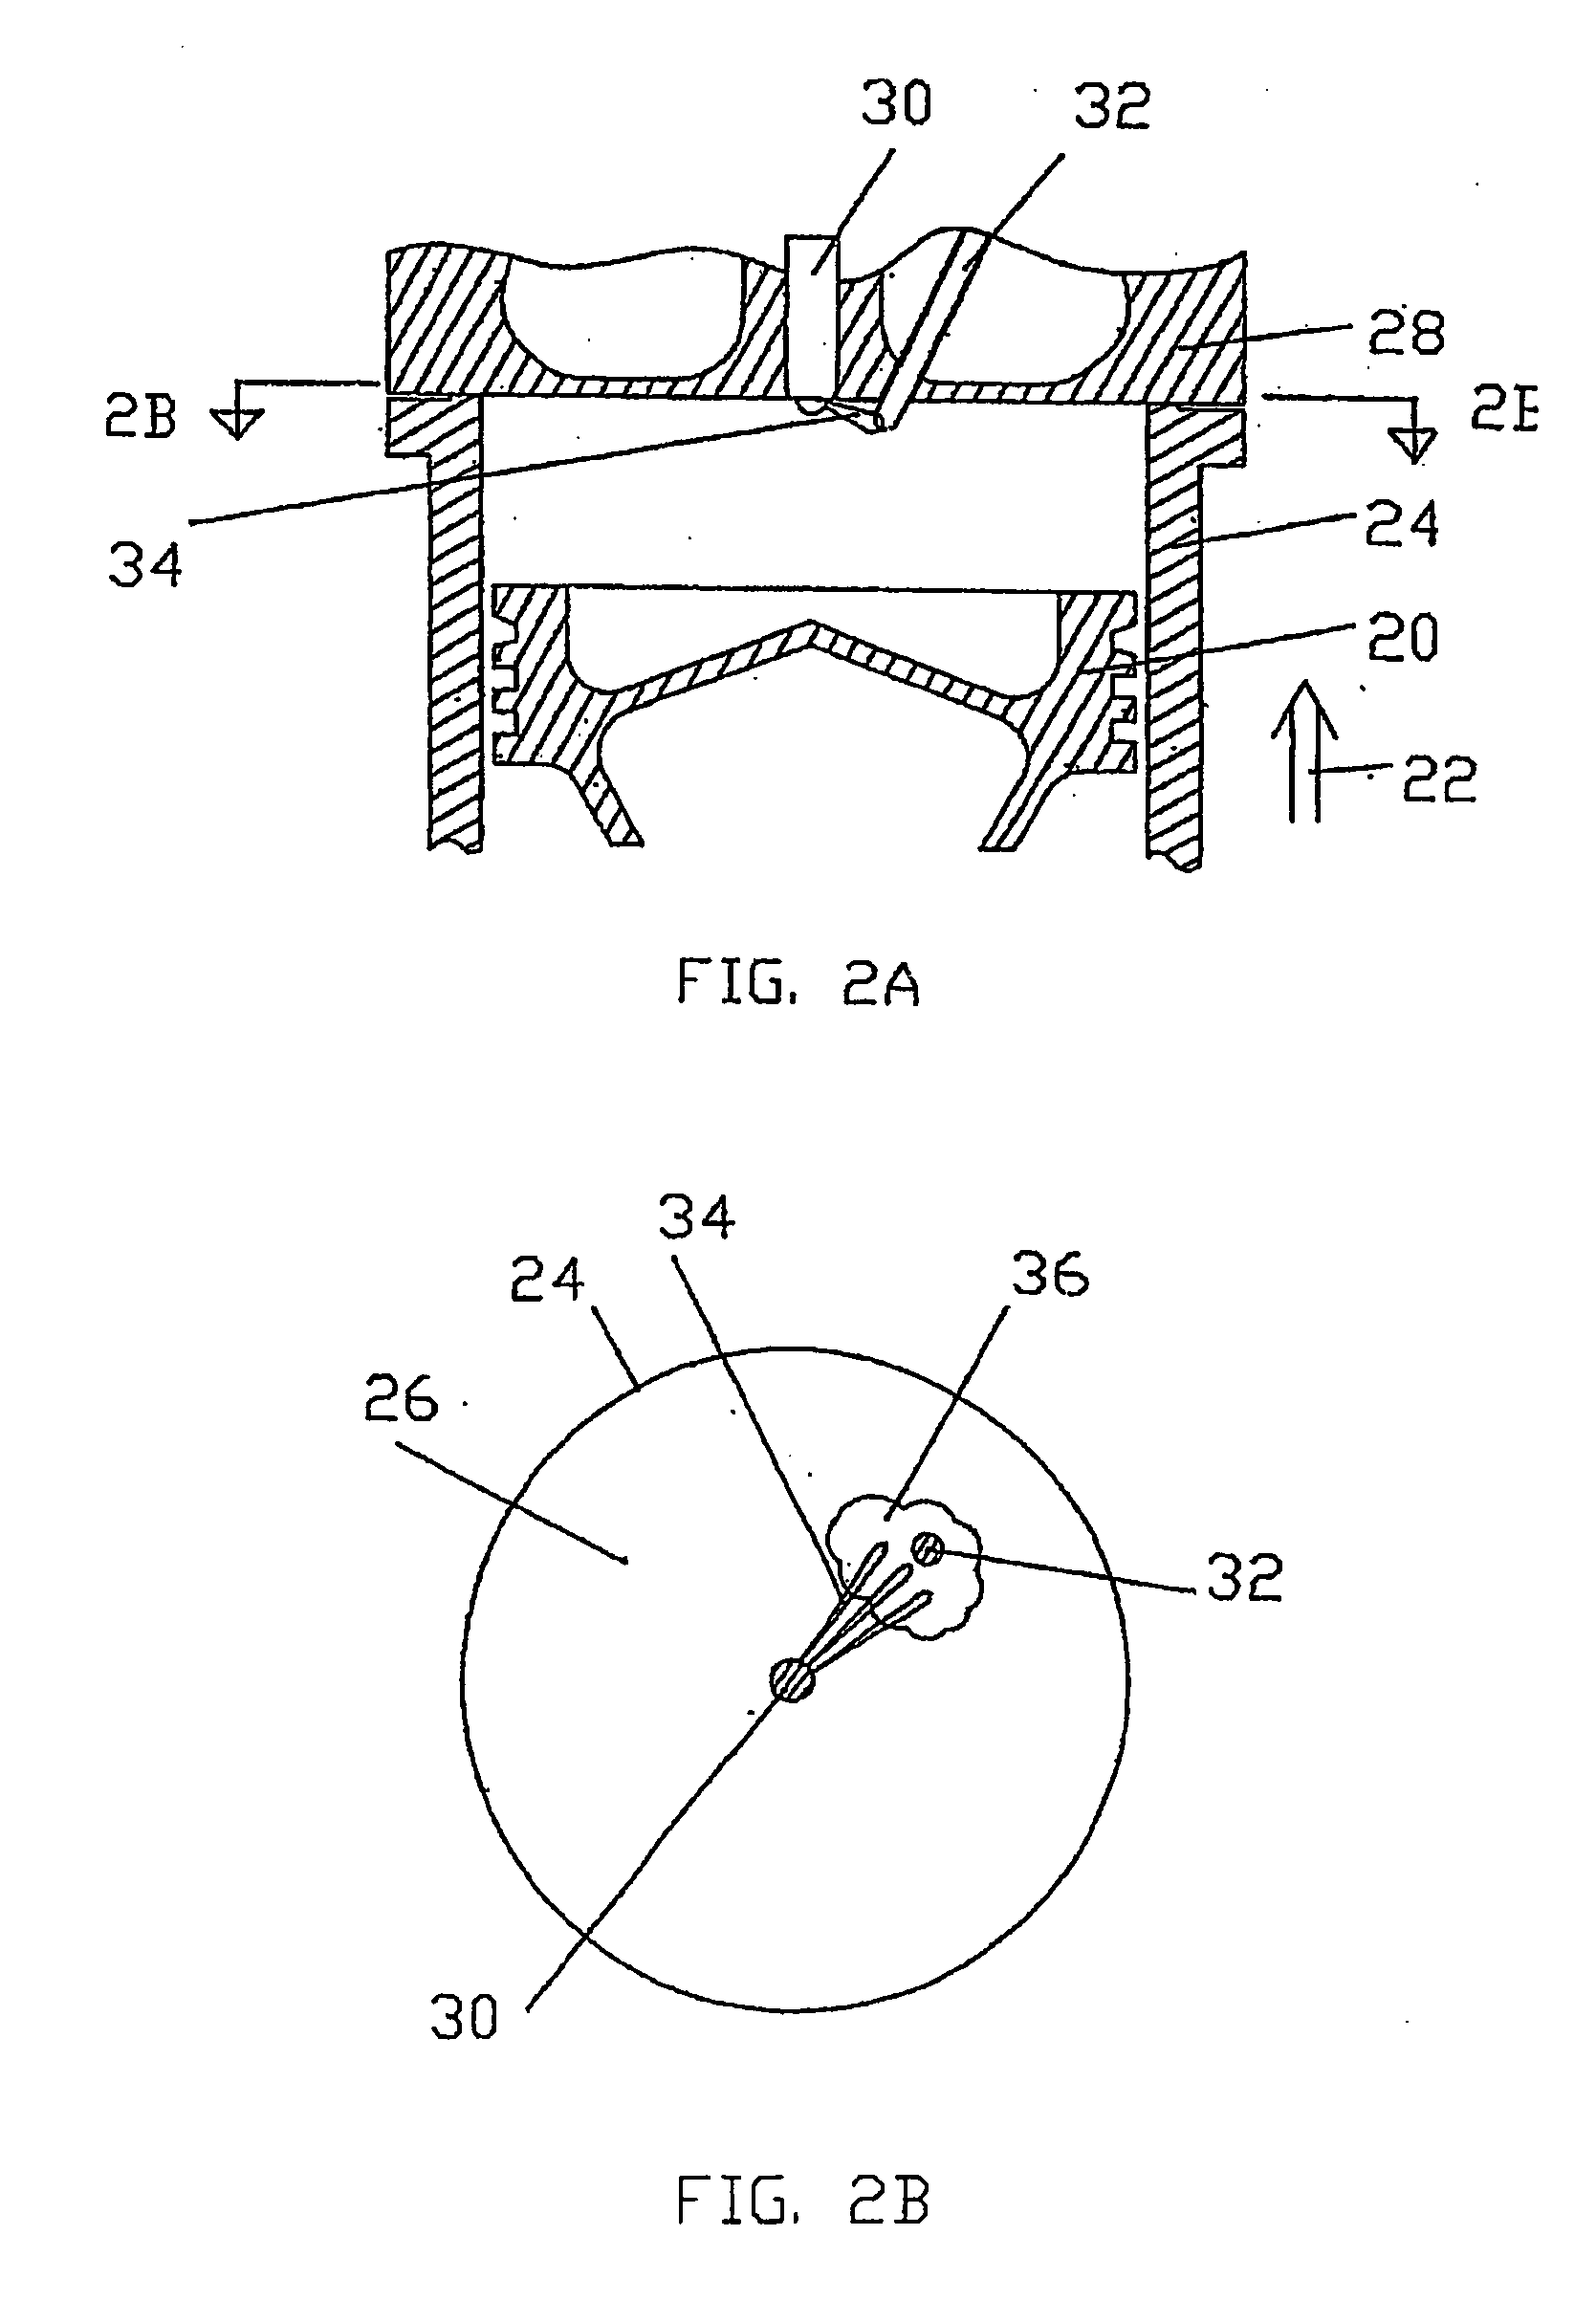 Control method and apparatus for gaseous fuelled internal combustion engine